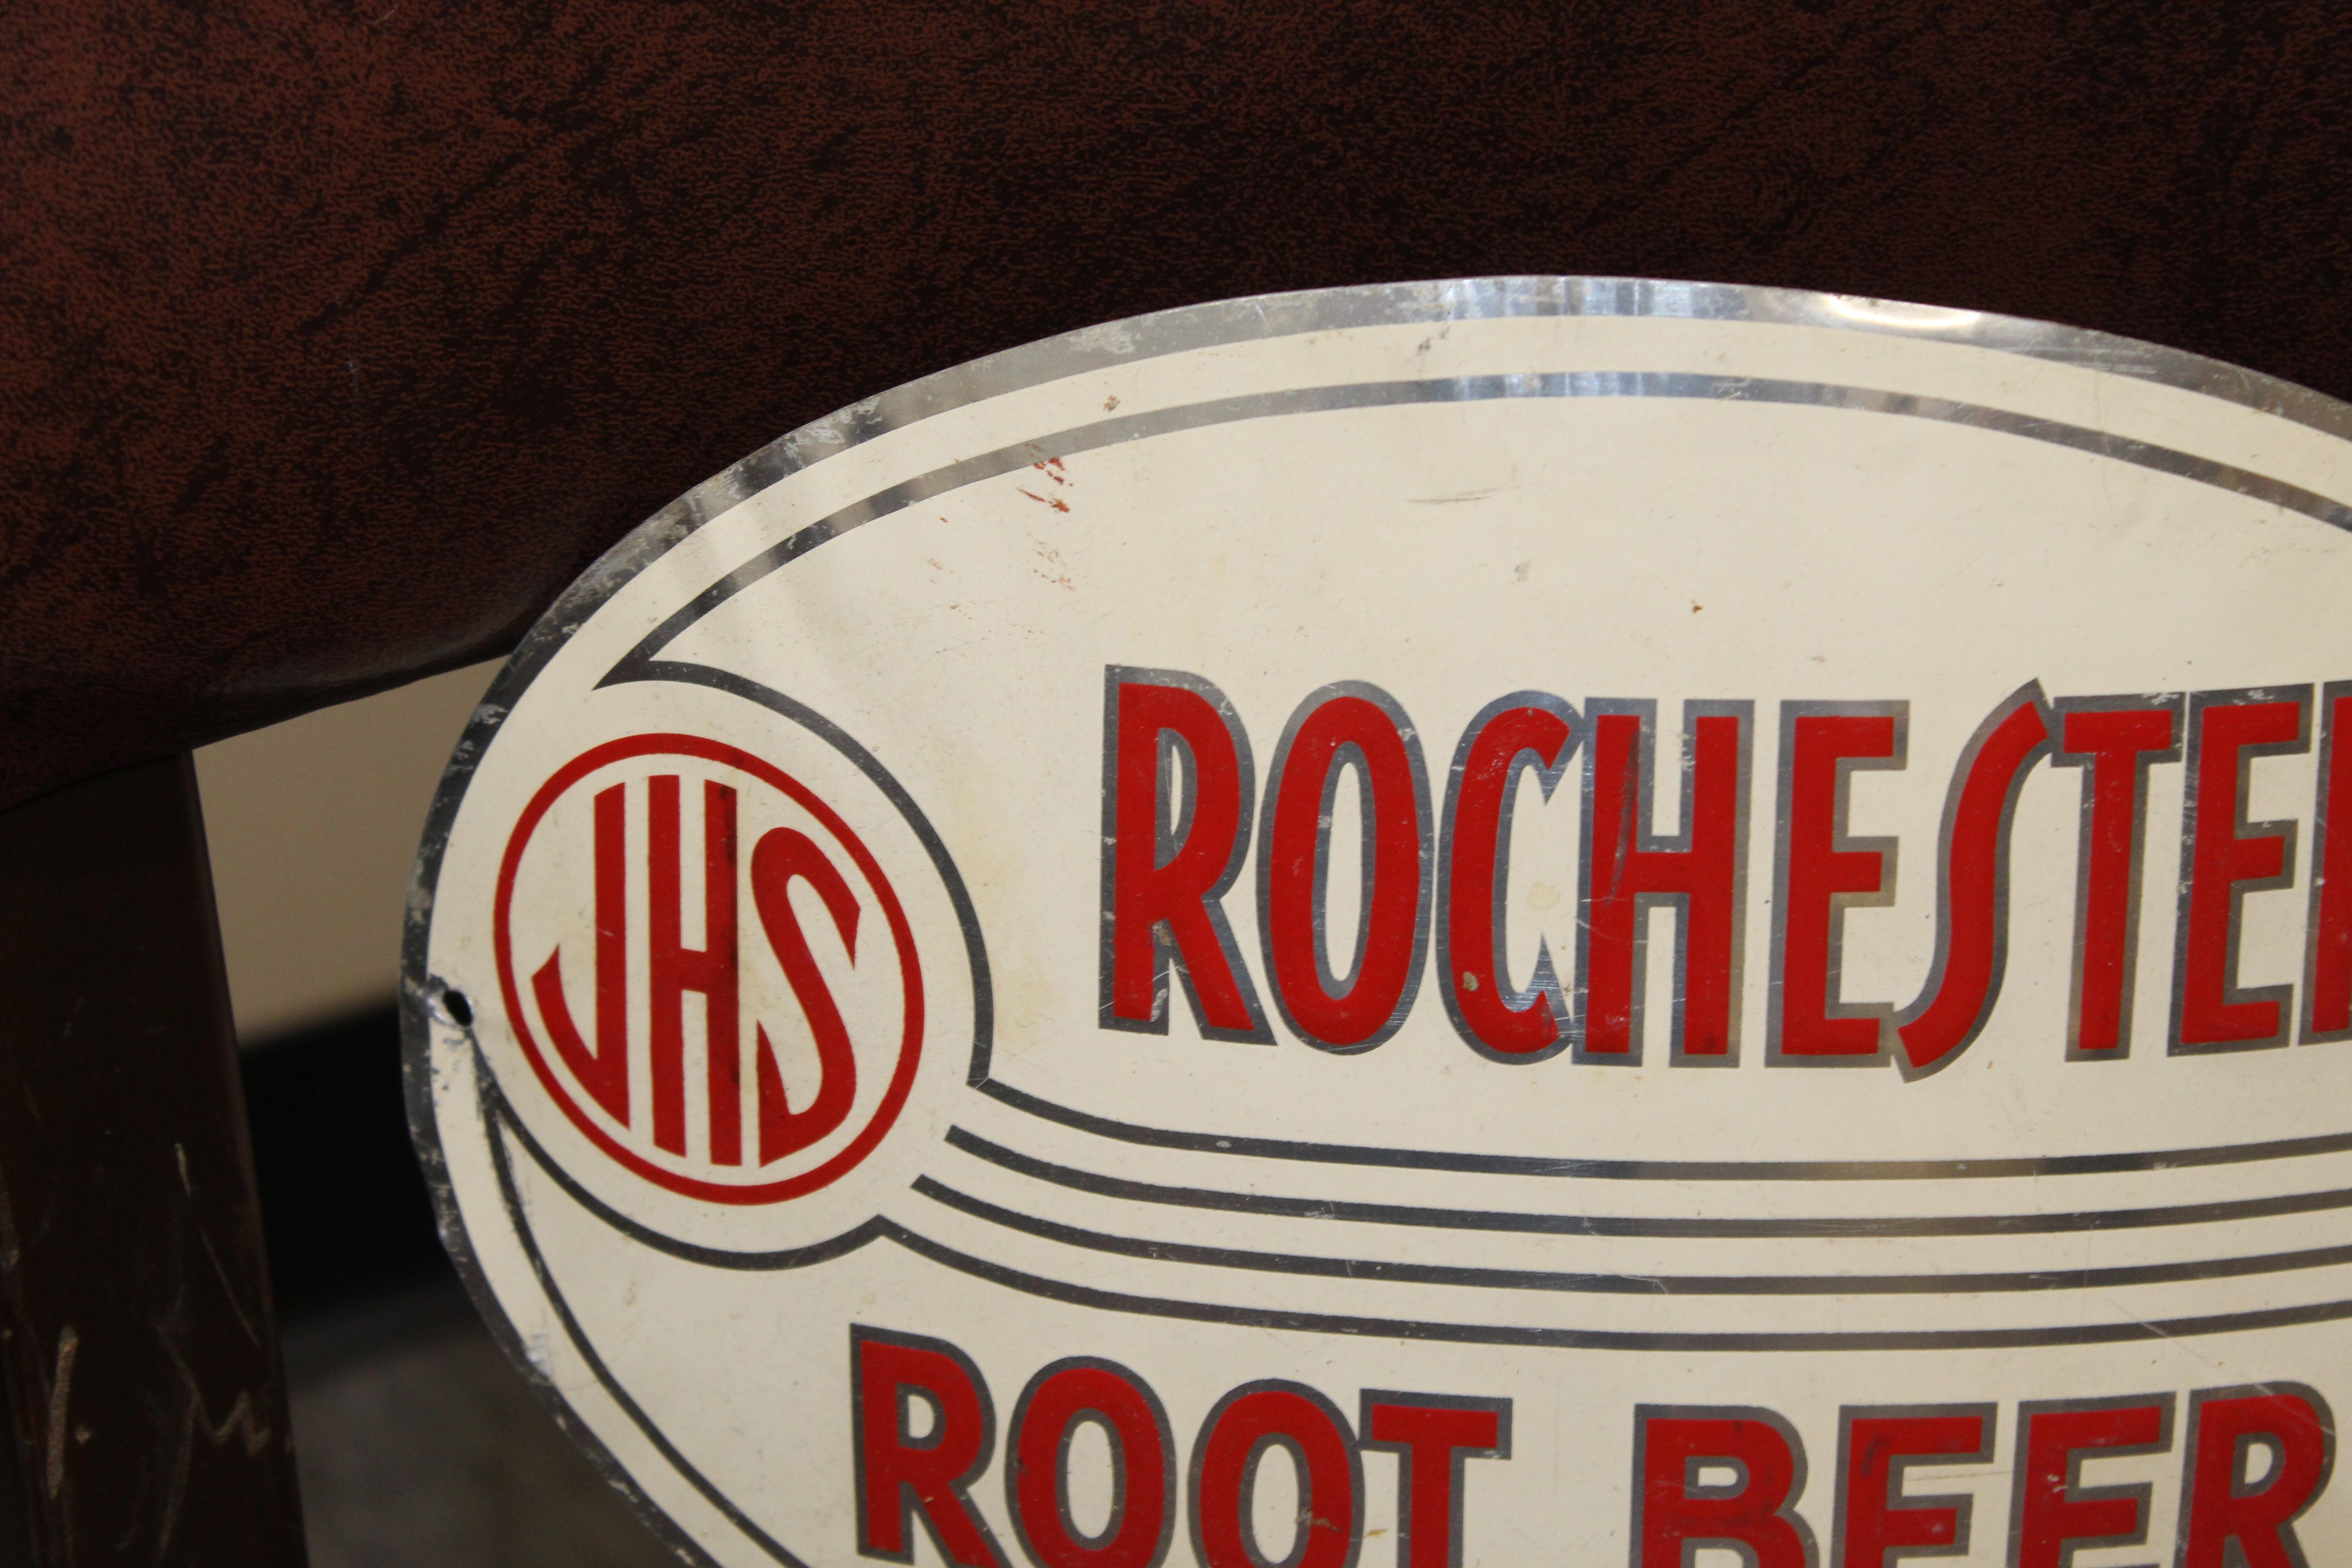 JHS and Rochester Root Beer were started by J. Hungerford Smith around the turn of the last Century in New York. Smith had developed a way of preserving fruit juices and making syrups for year-round use. He also developed his own root beer syrup and